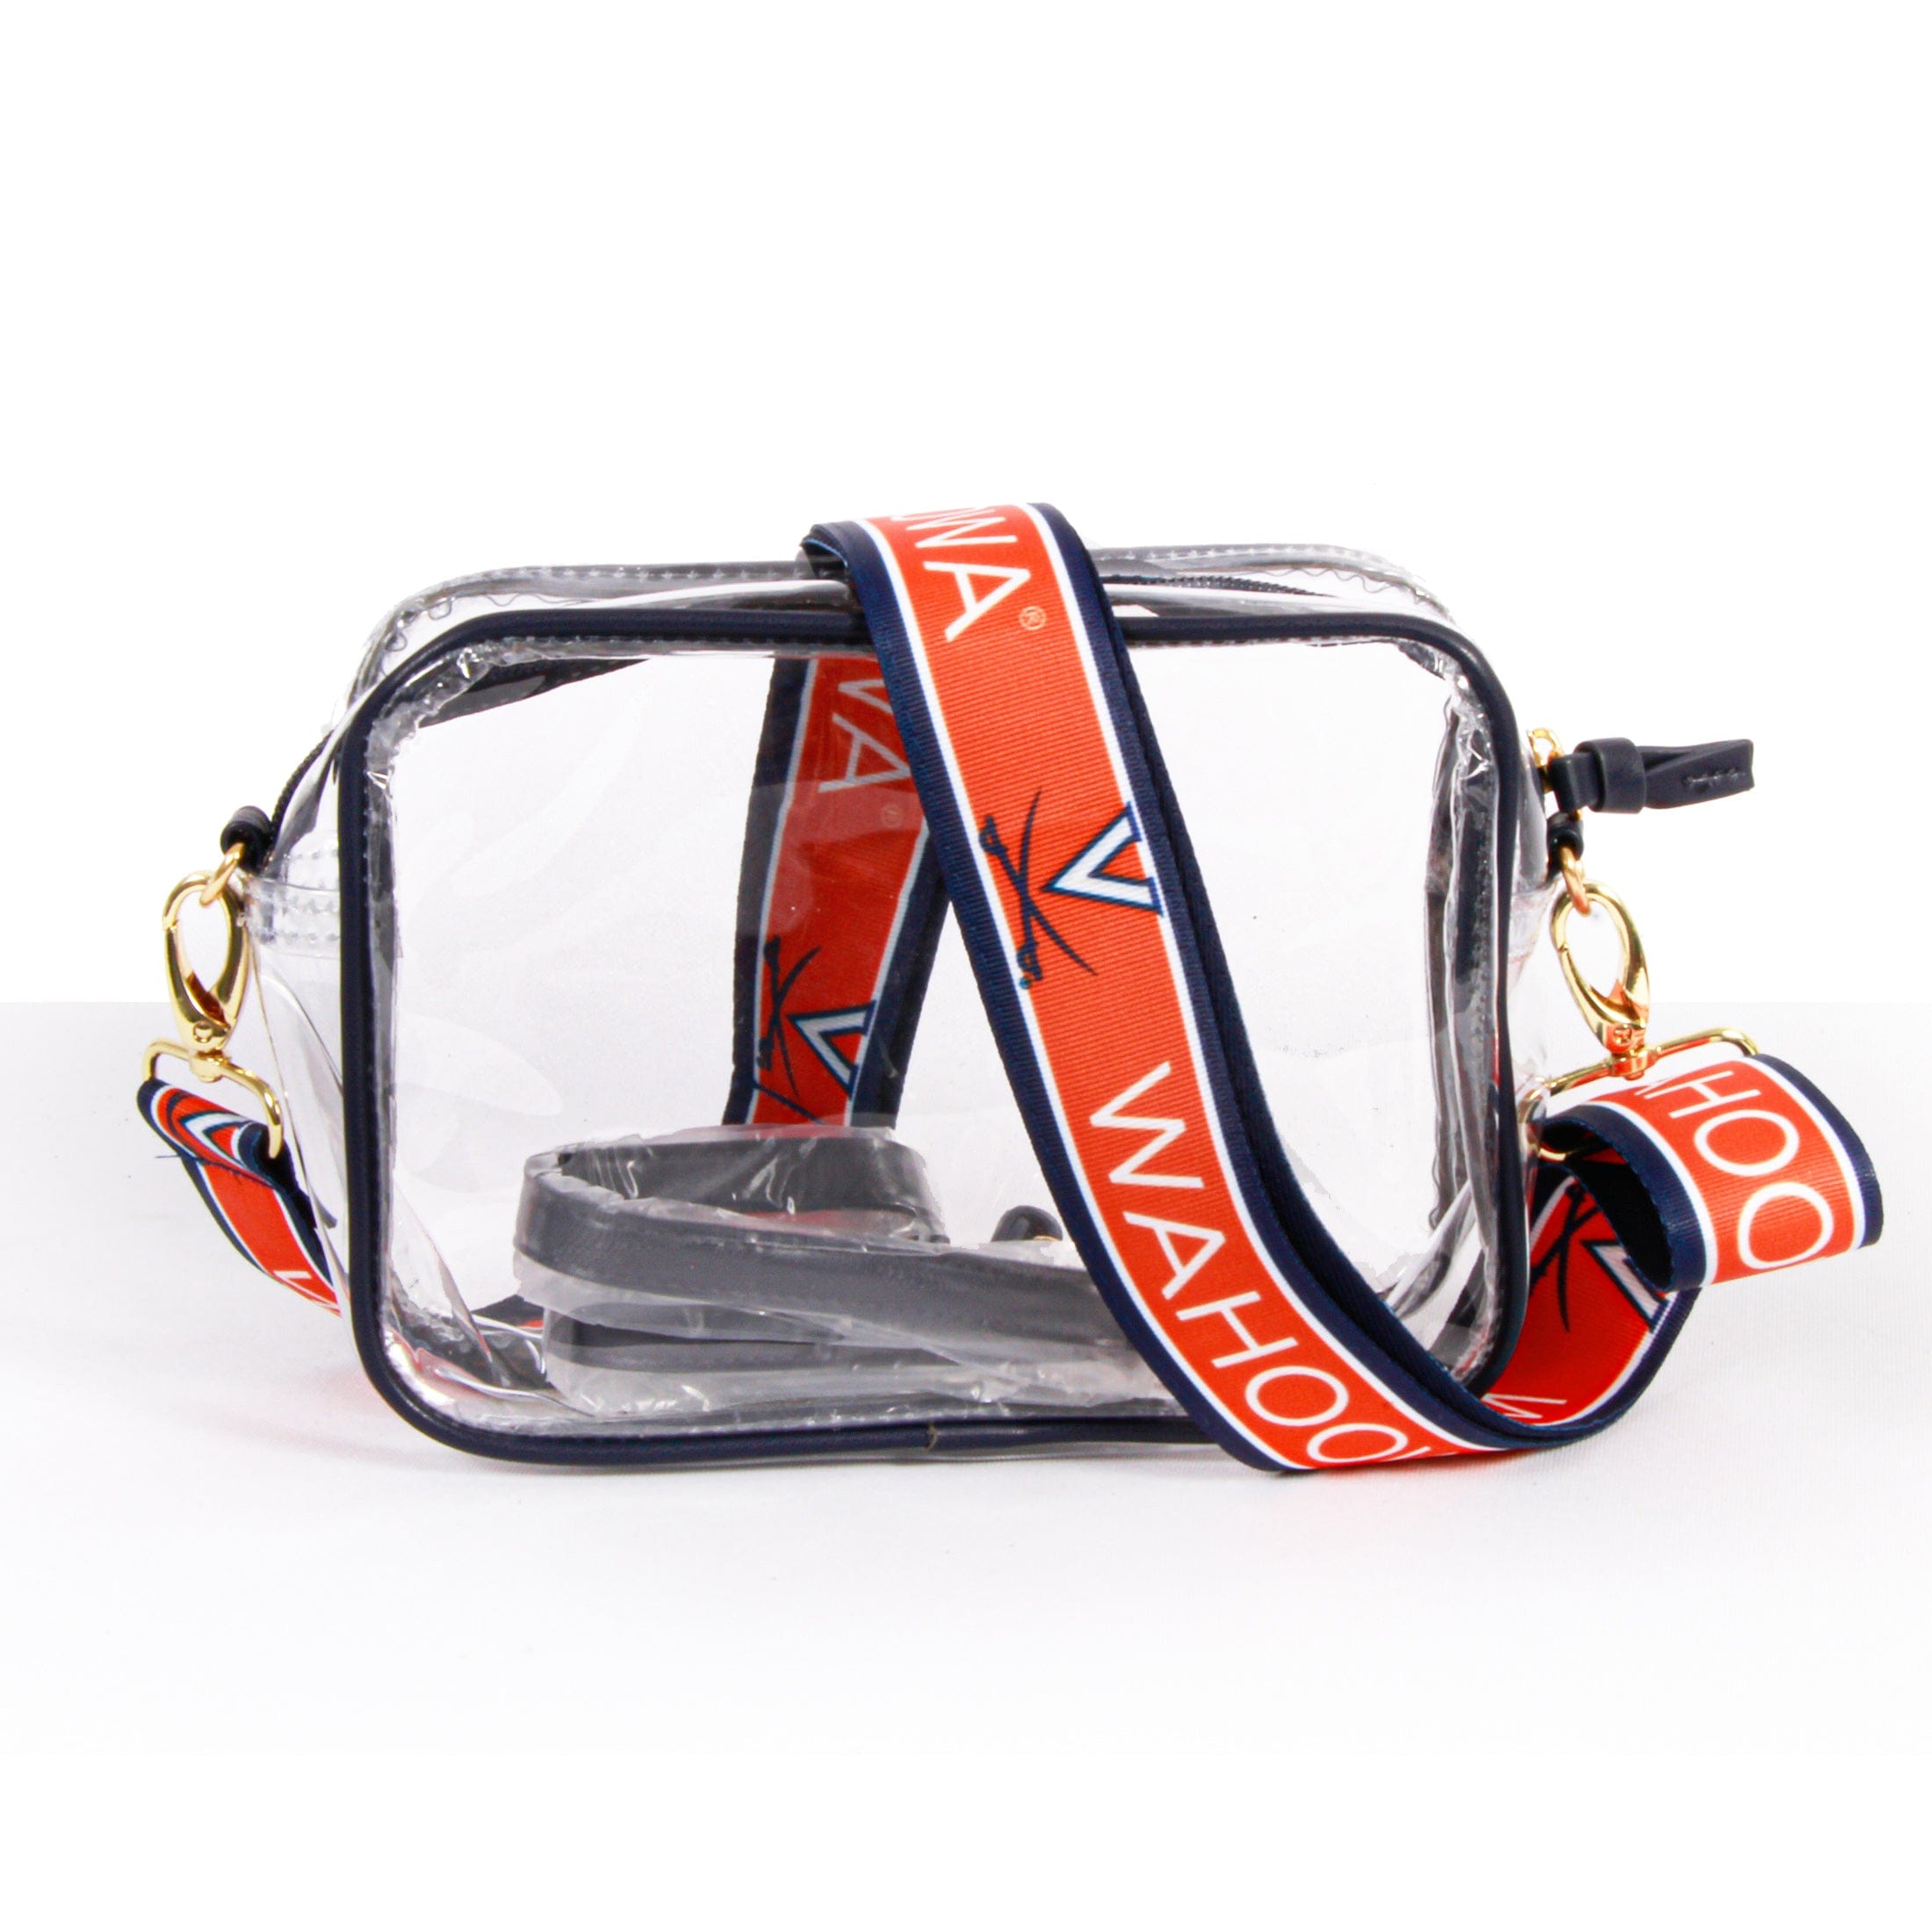 bridget clear purse with patterned shoulder straps university of virginia clear purse with patterned straps university of virginia purse 30117626445879